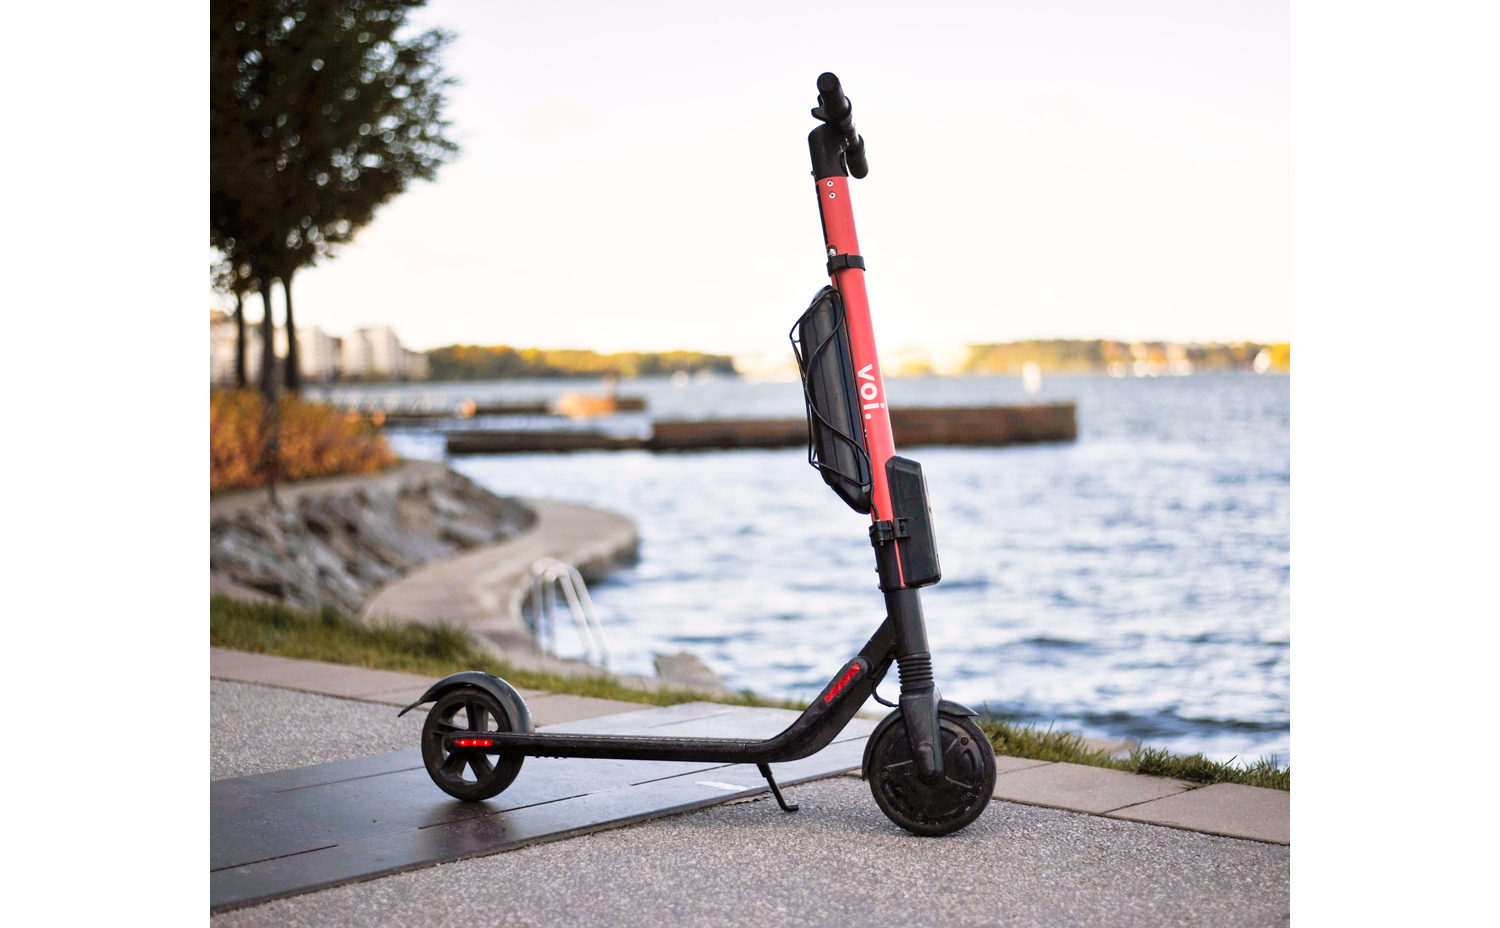 menneskelige ressourcer stewardesse grube E-scooter support could see car journeys fall 20%, says Voi UK GM |  Infrastructure | micromobilitybiz